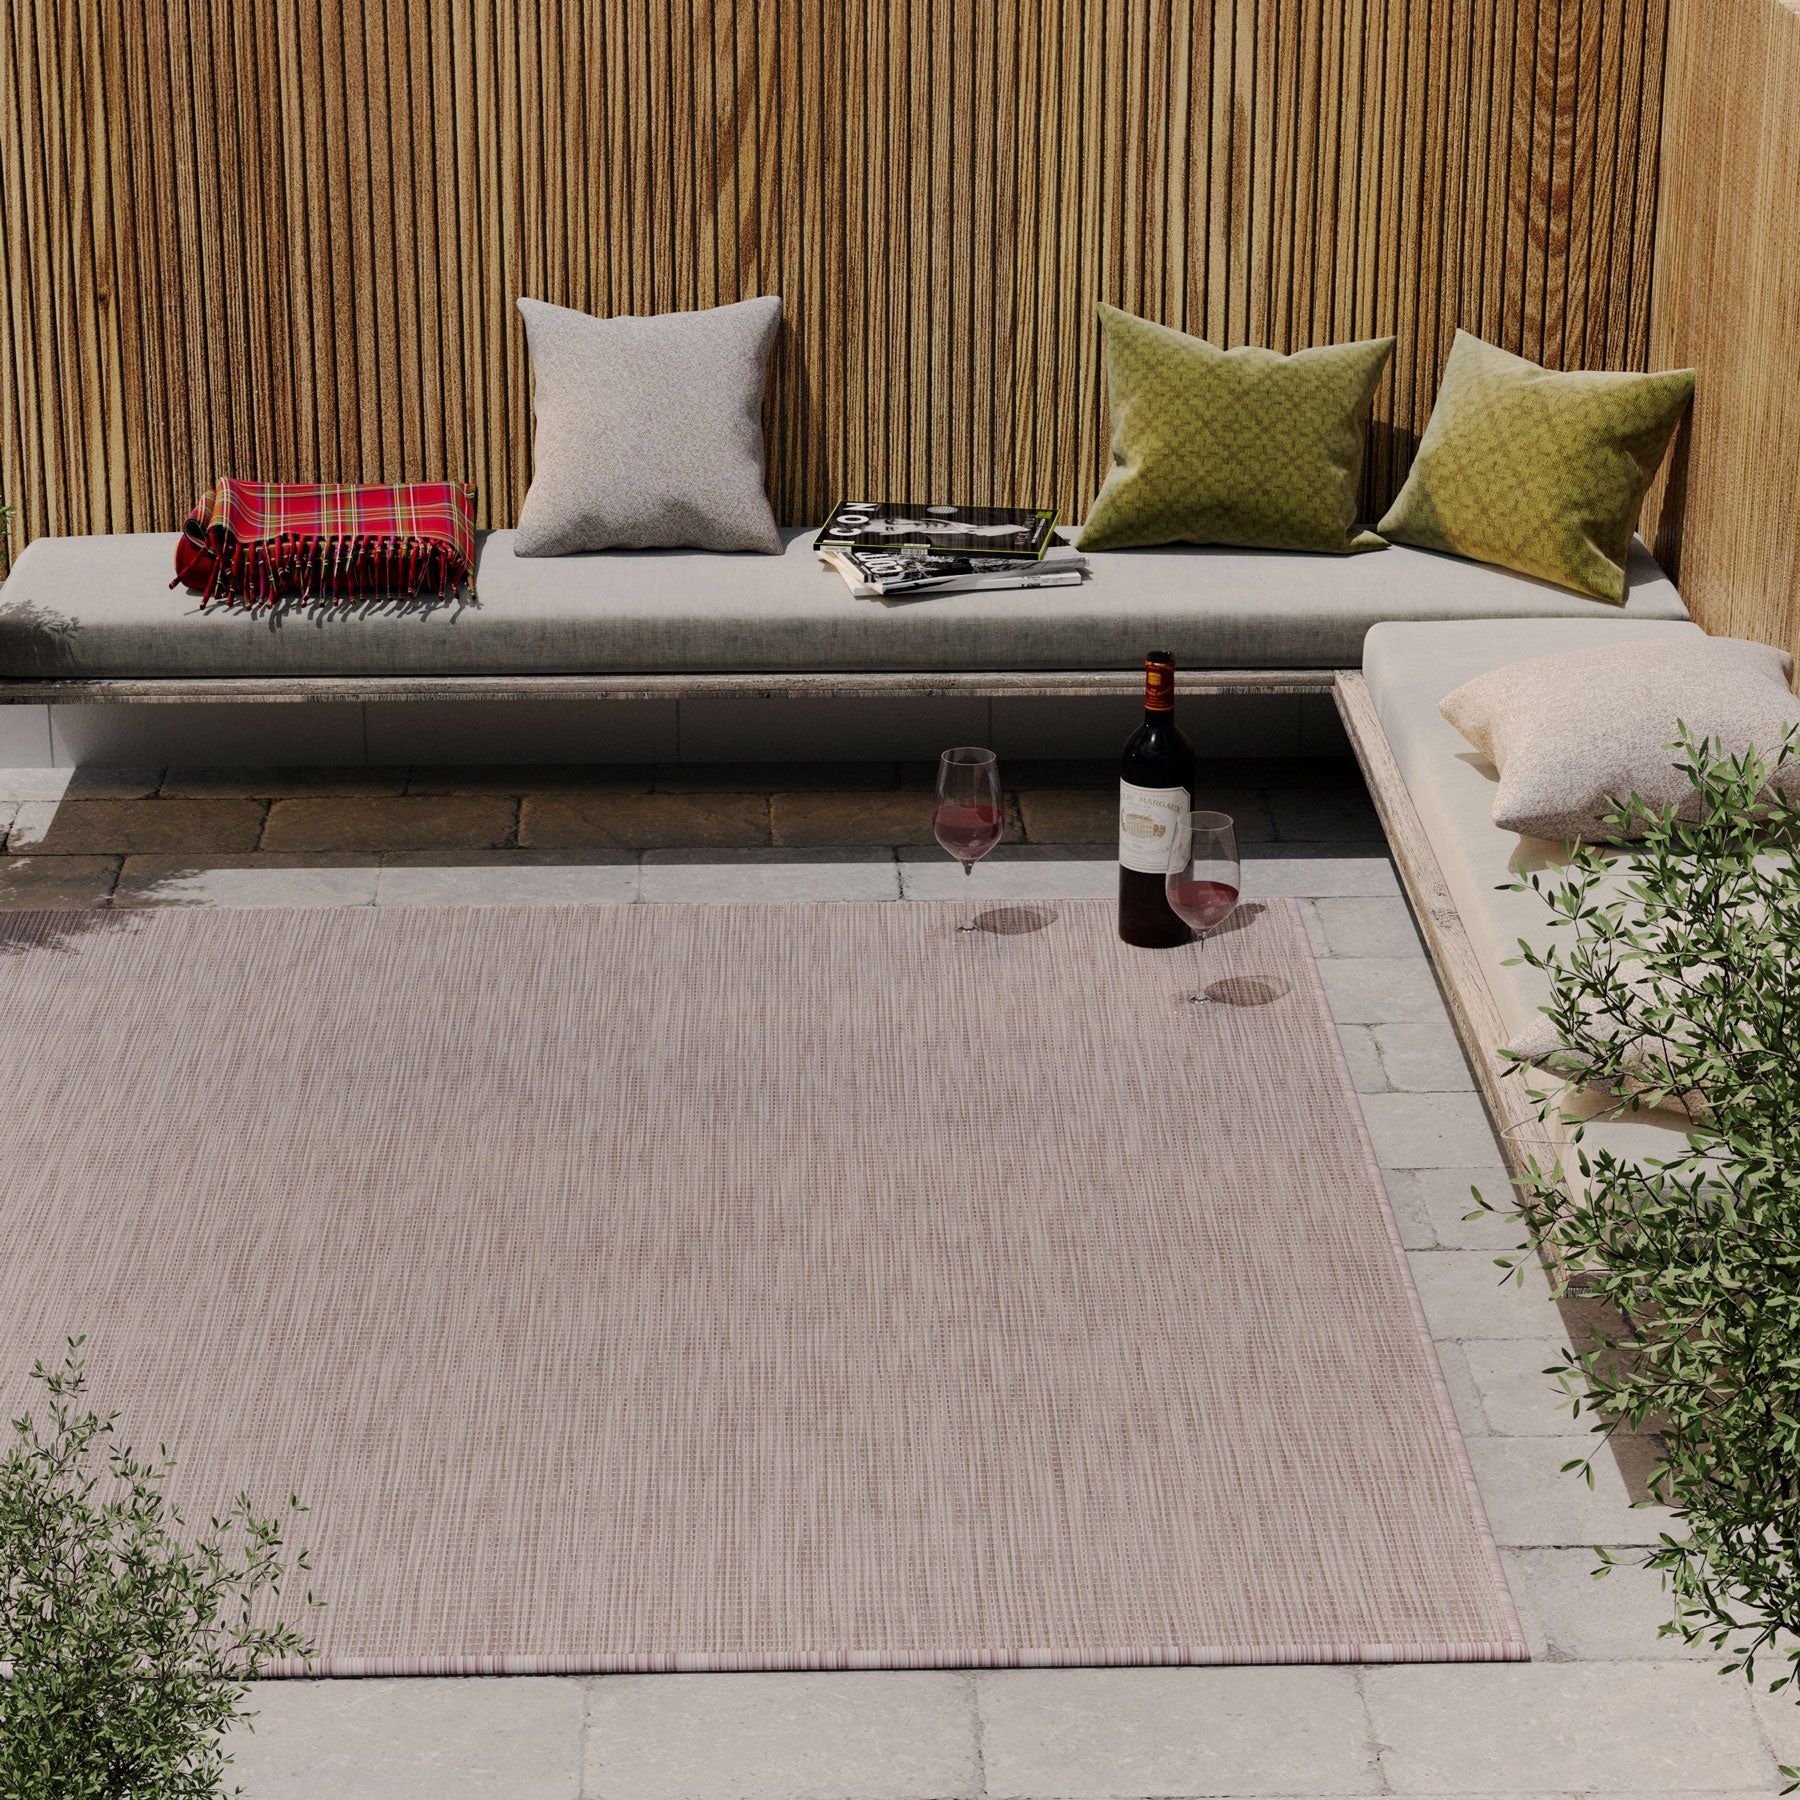 Cover Your Outdoor Space with Stylish Patio Rugs